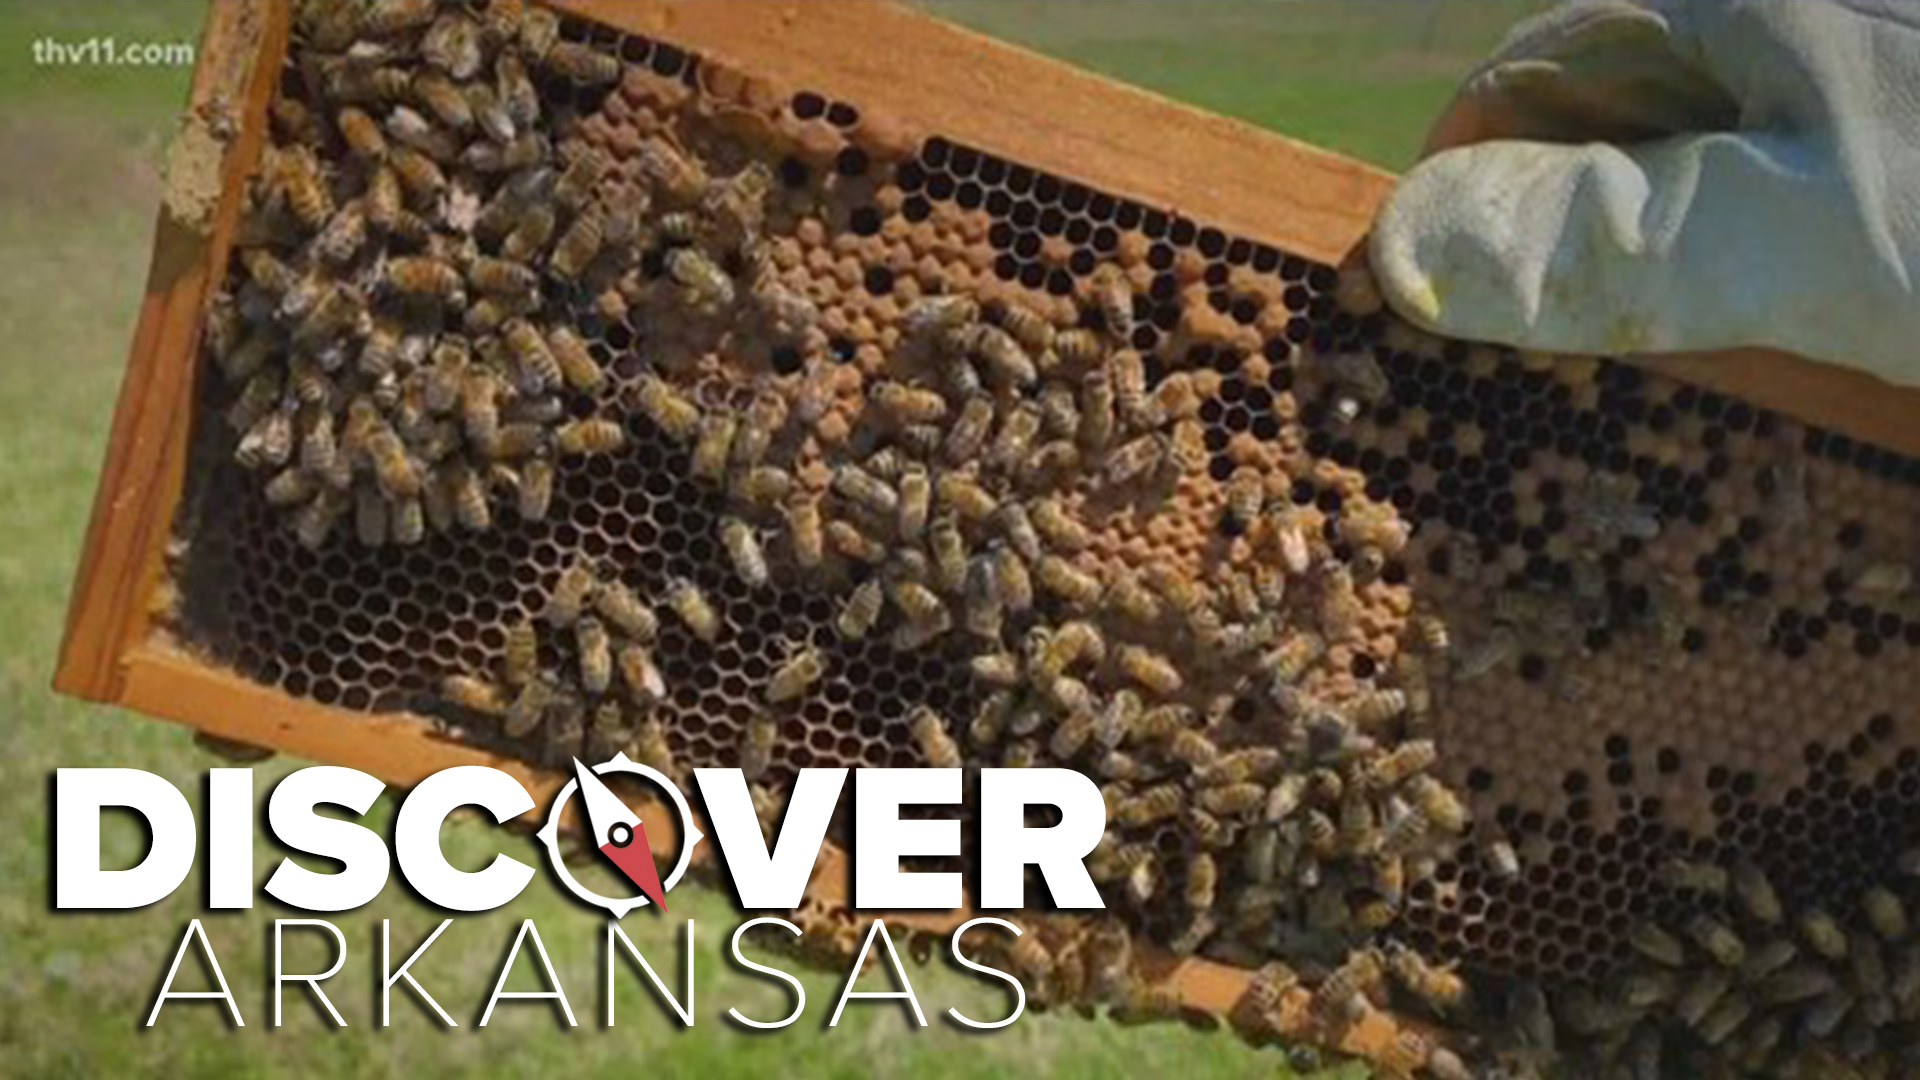 This week in discover Arkansas Ashley King shows us what the buzz is about on Bemis Family Farm.